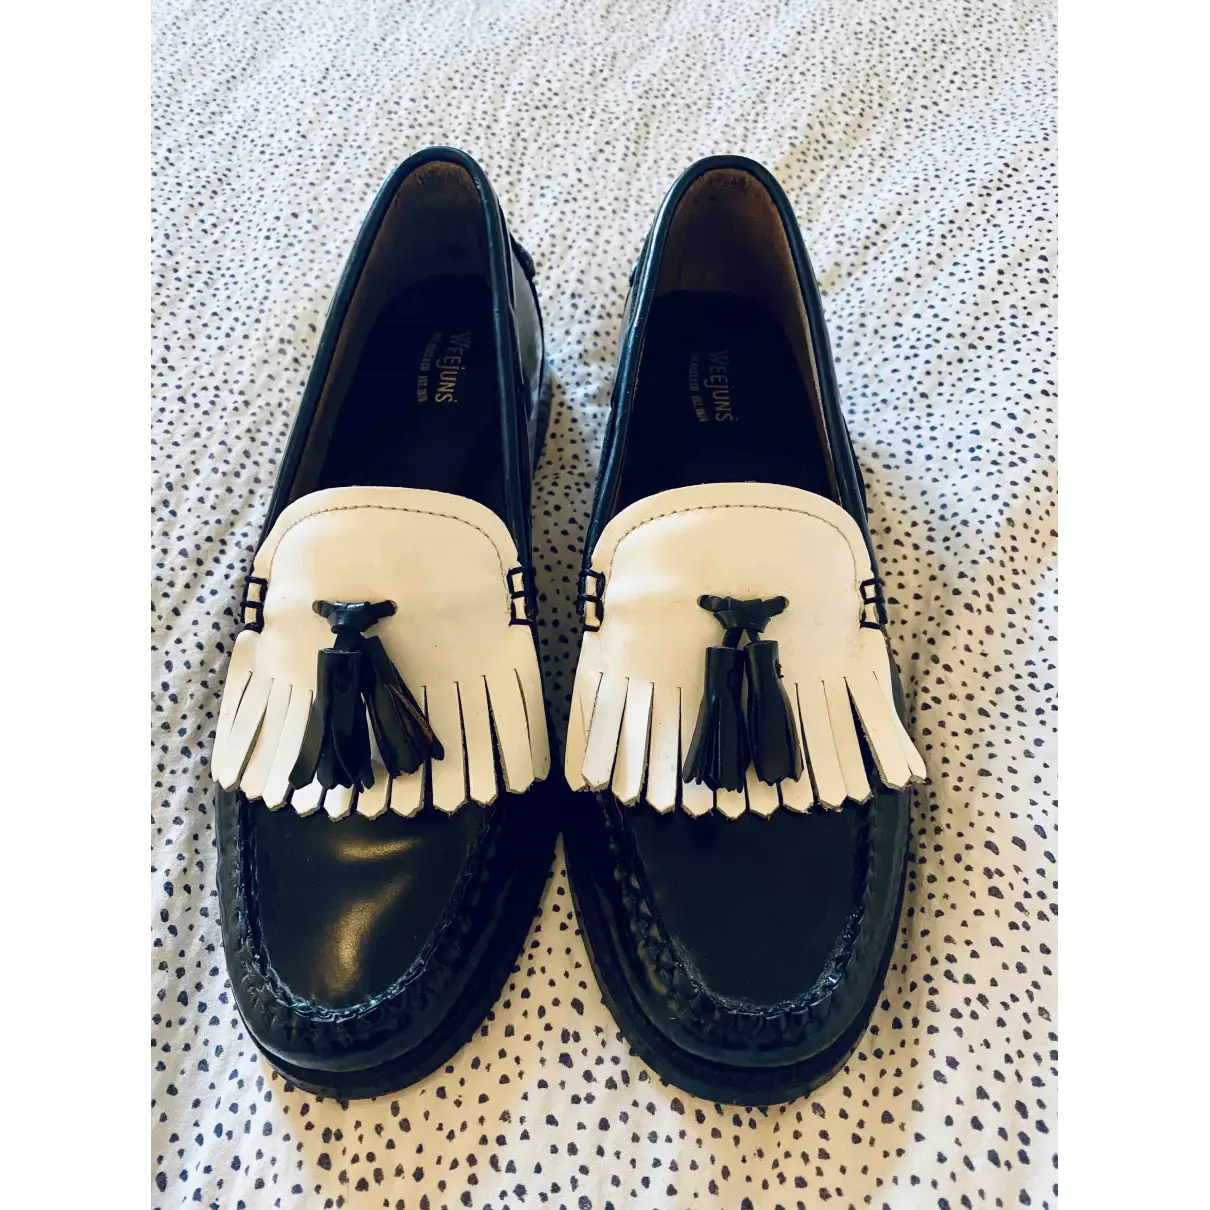 Buy Bass Weejun Patent leather flats online